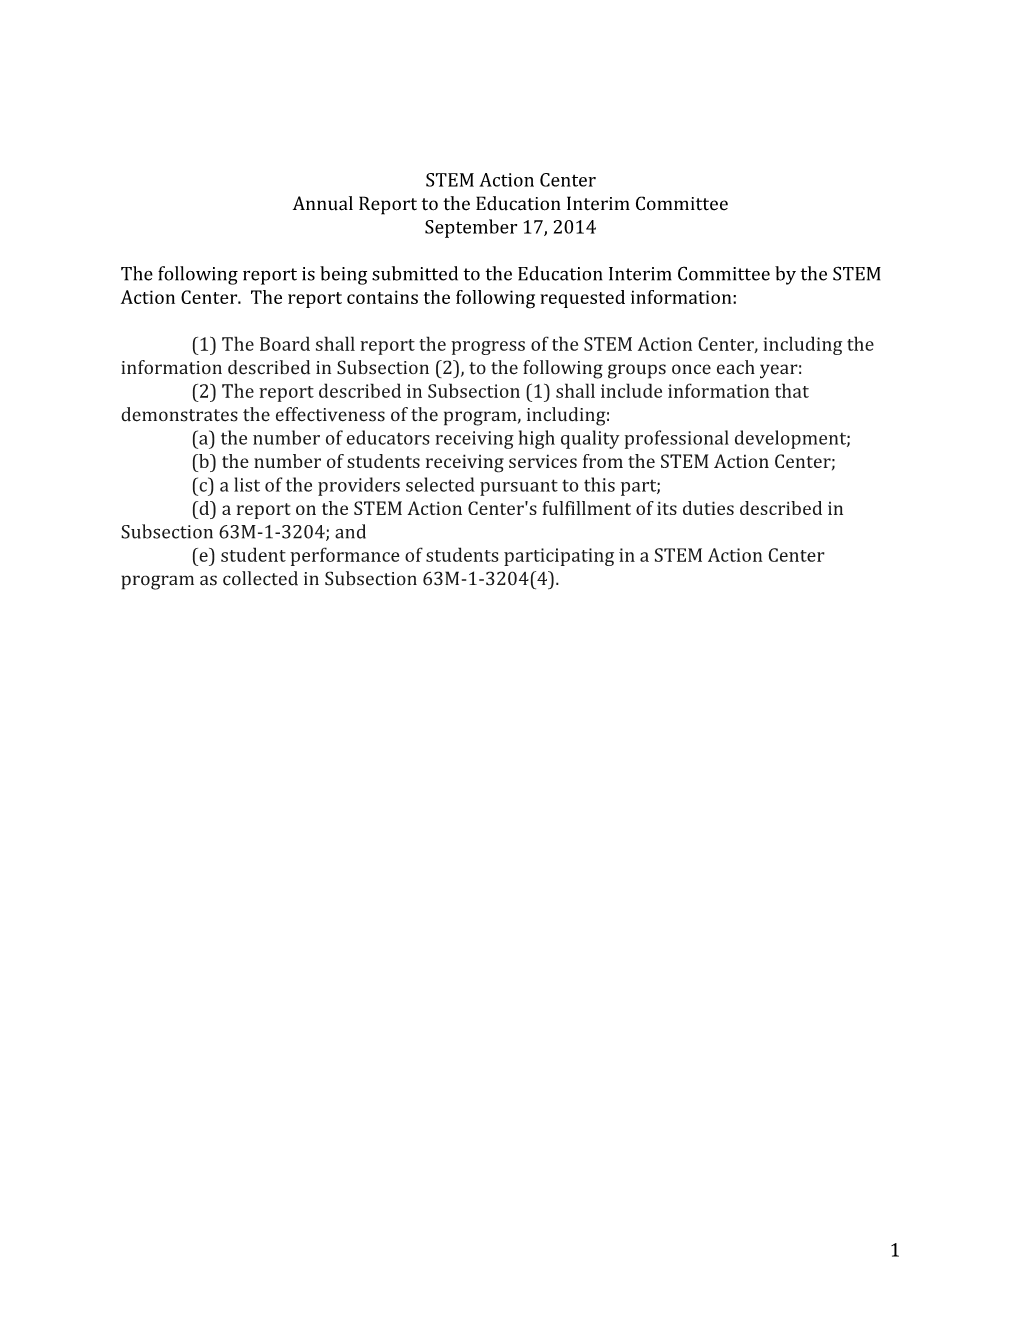 1 STEM Action Center Annual Report to the Education Interim Committee September 17, 2014 the Following Report Is Being Submitted